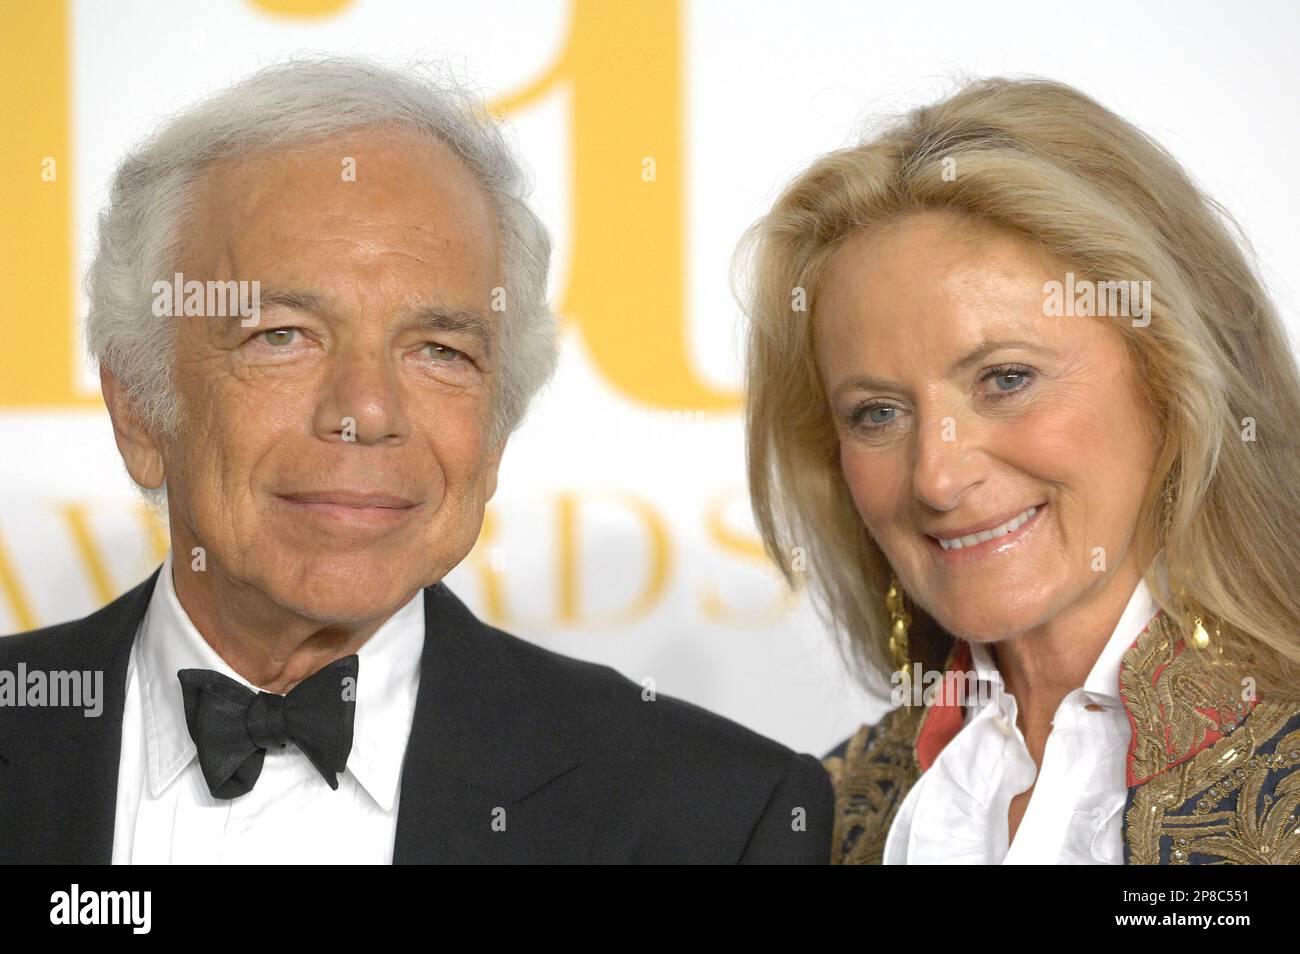 Ralph Lauren and his wife Ricky attending the Concorso d'Eleganza